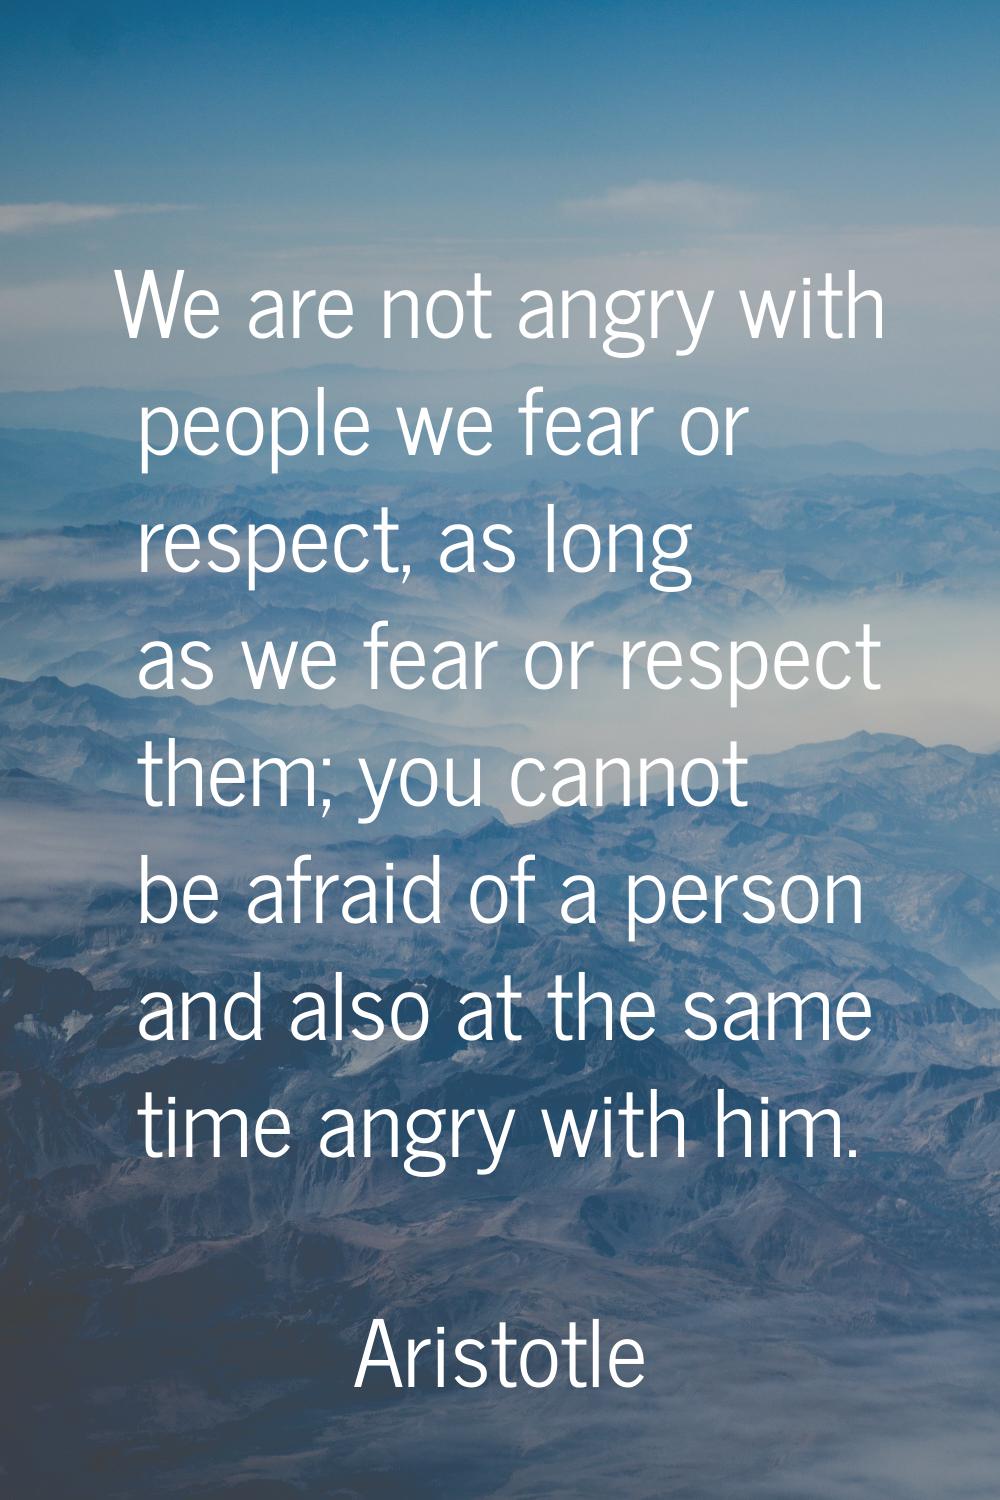 We are not angry with people we fear or respect, as long as we fear or respect them; you cannot be 